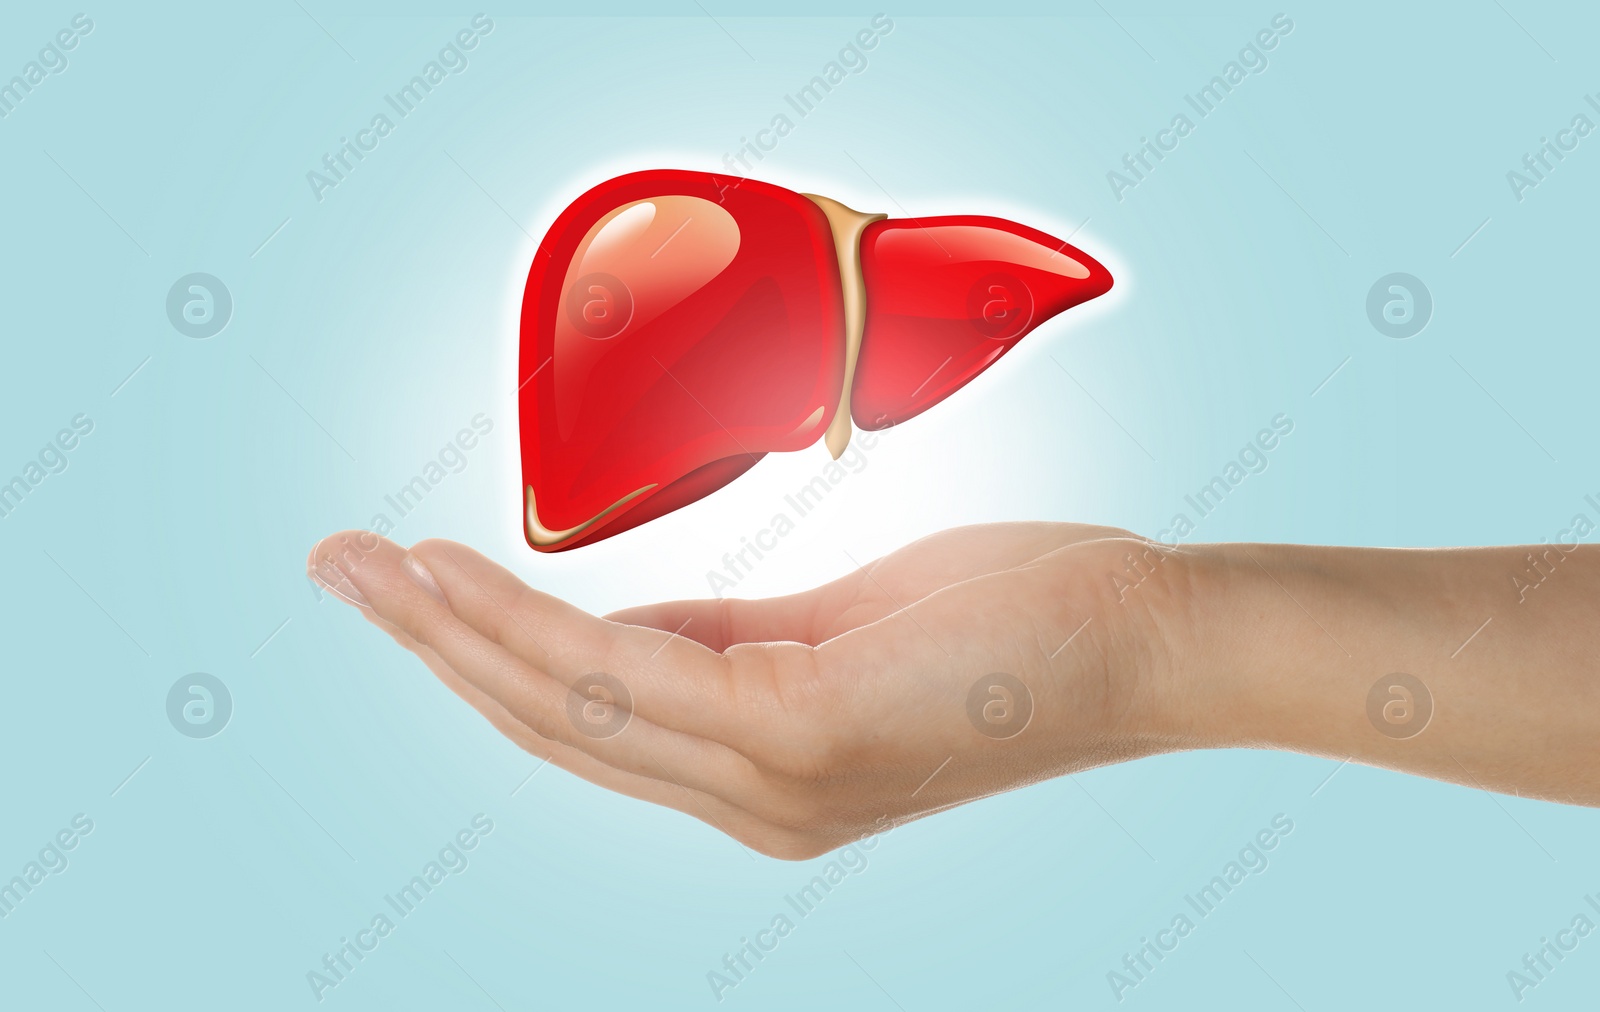 Image of Woman and illustration of liver on light blue background, closeup